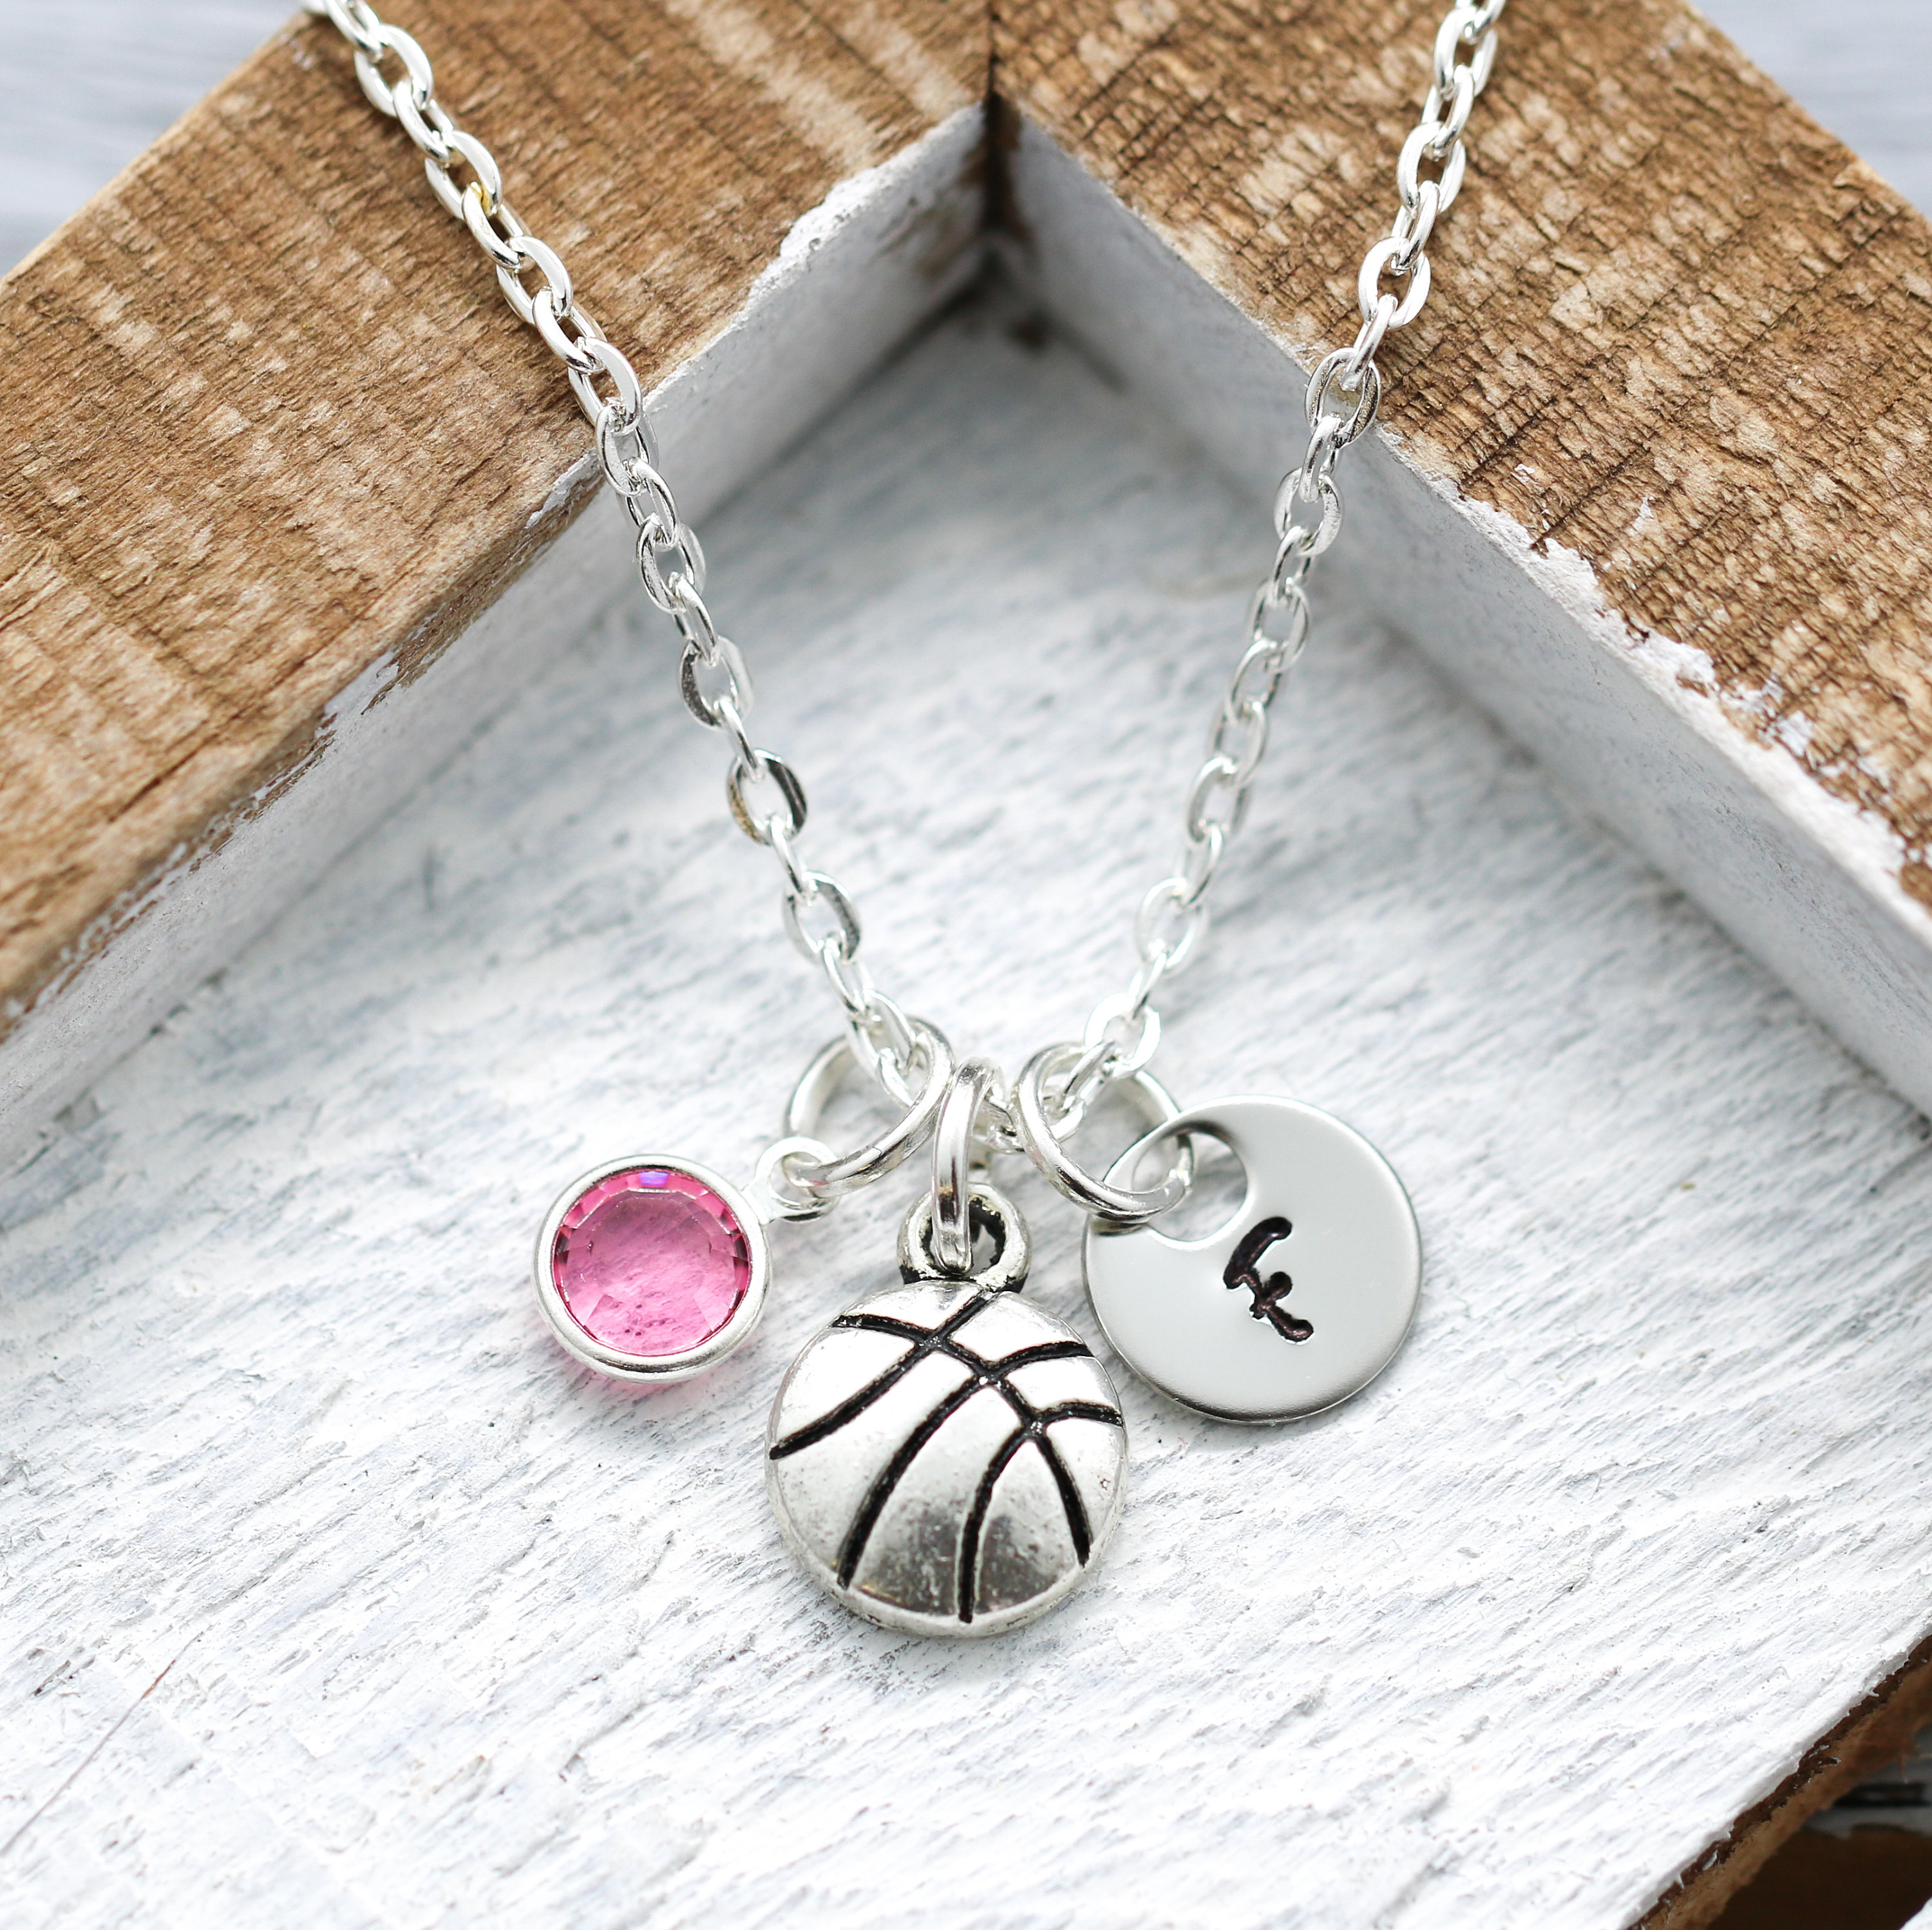 18. Basketball Necklace For Girls